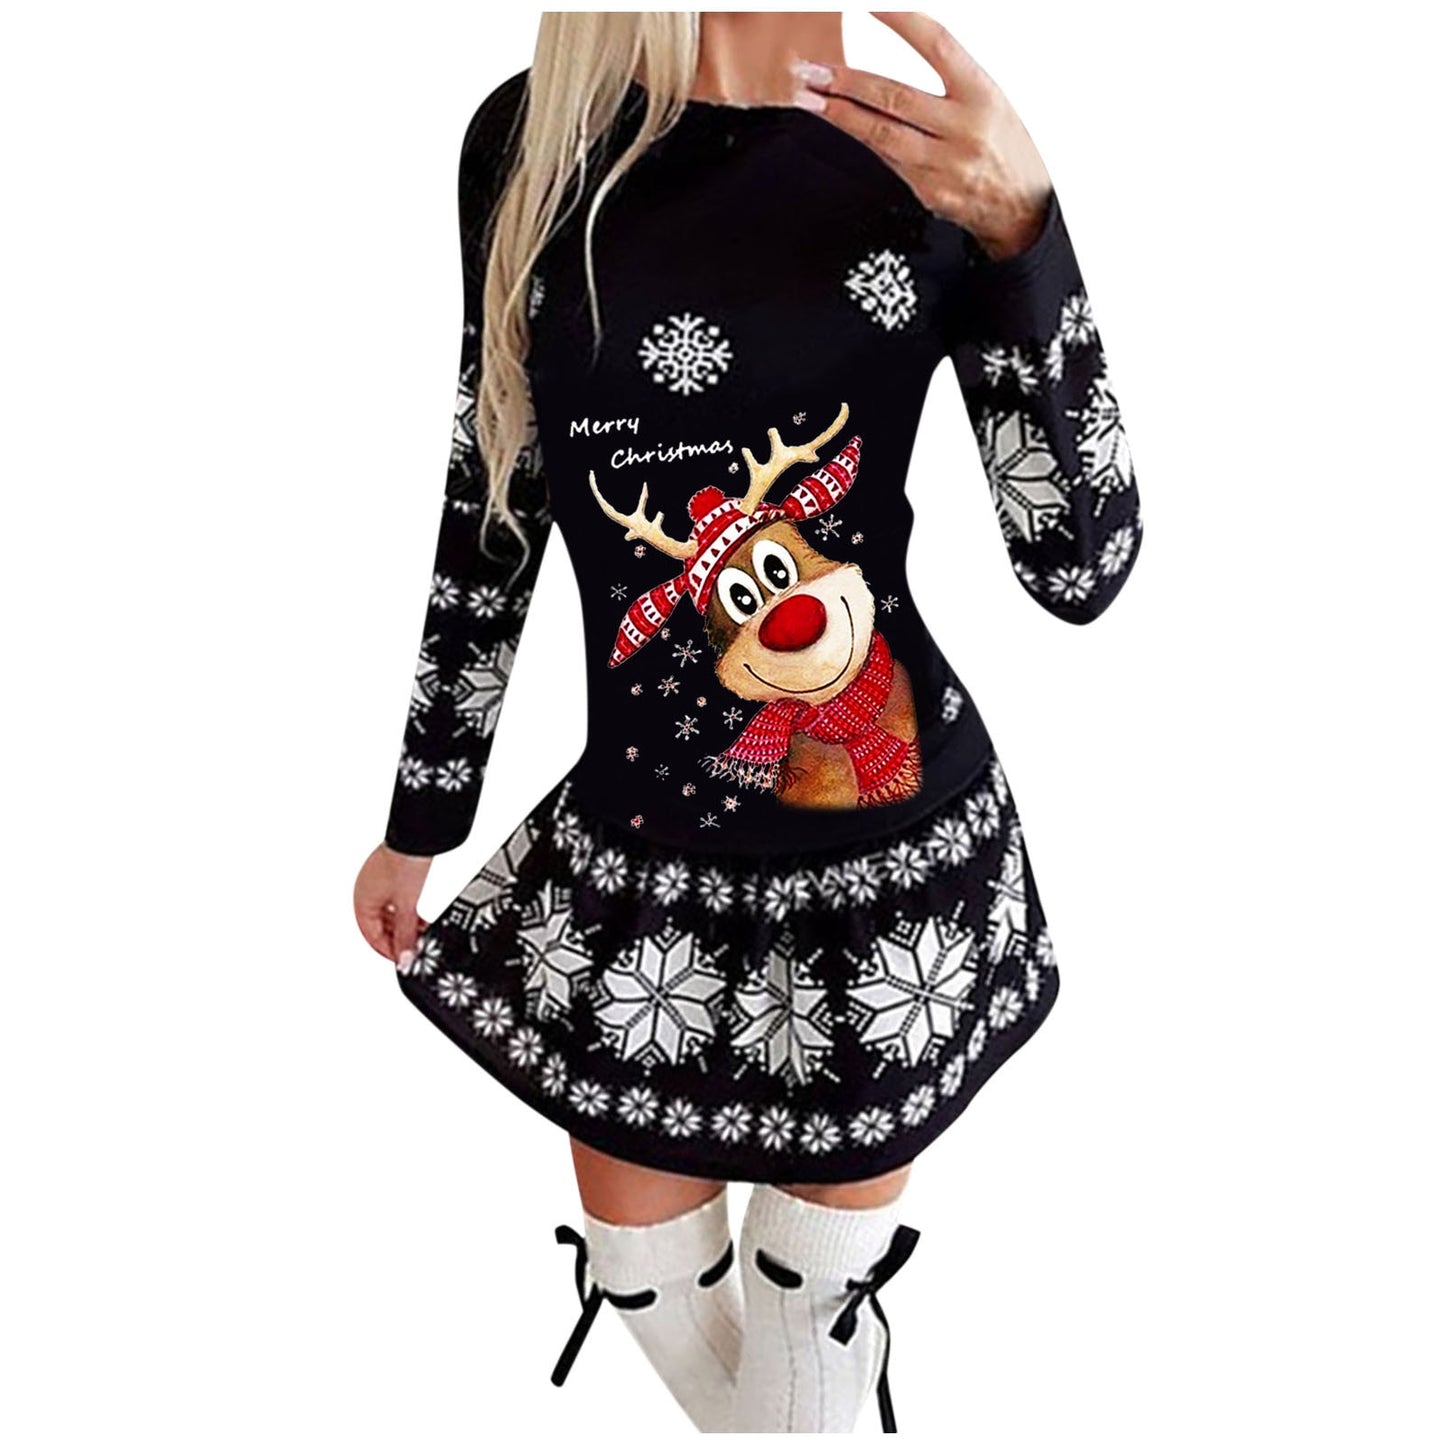 Long-sleeved Christmas Casual Sexy Dress